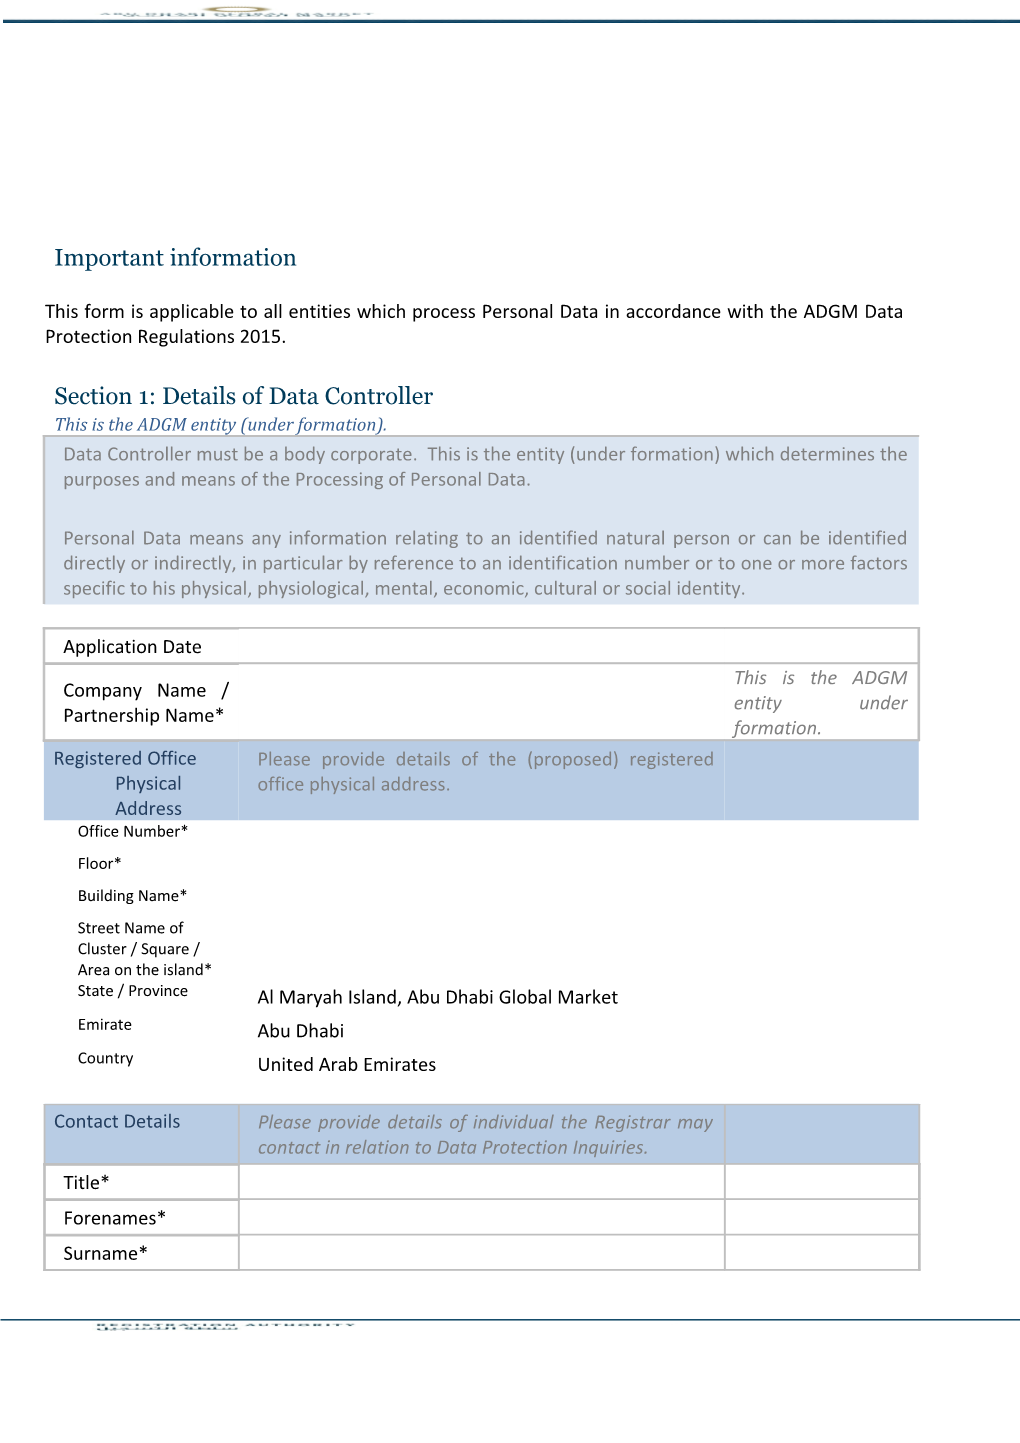 Section 1: Details of Data Controller